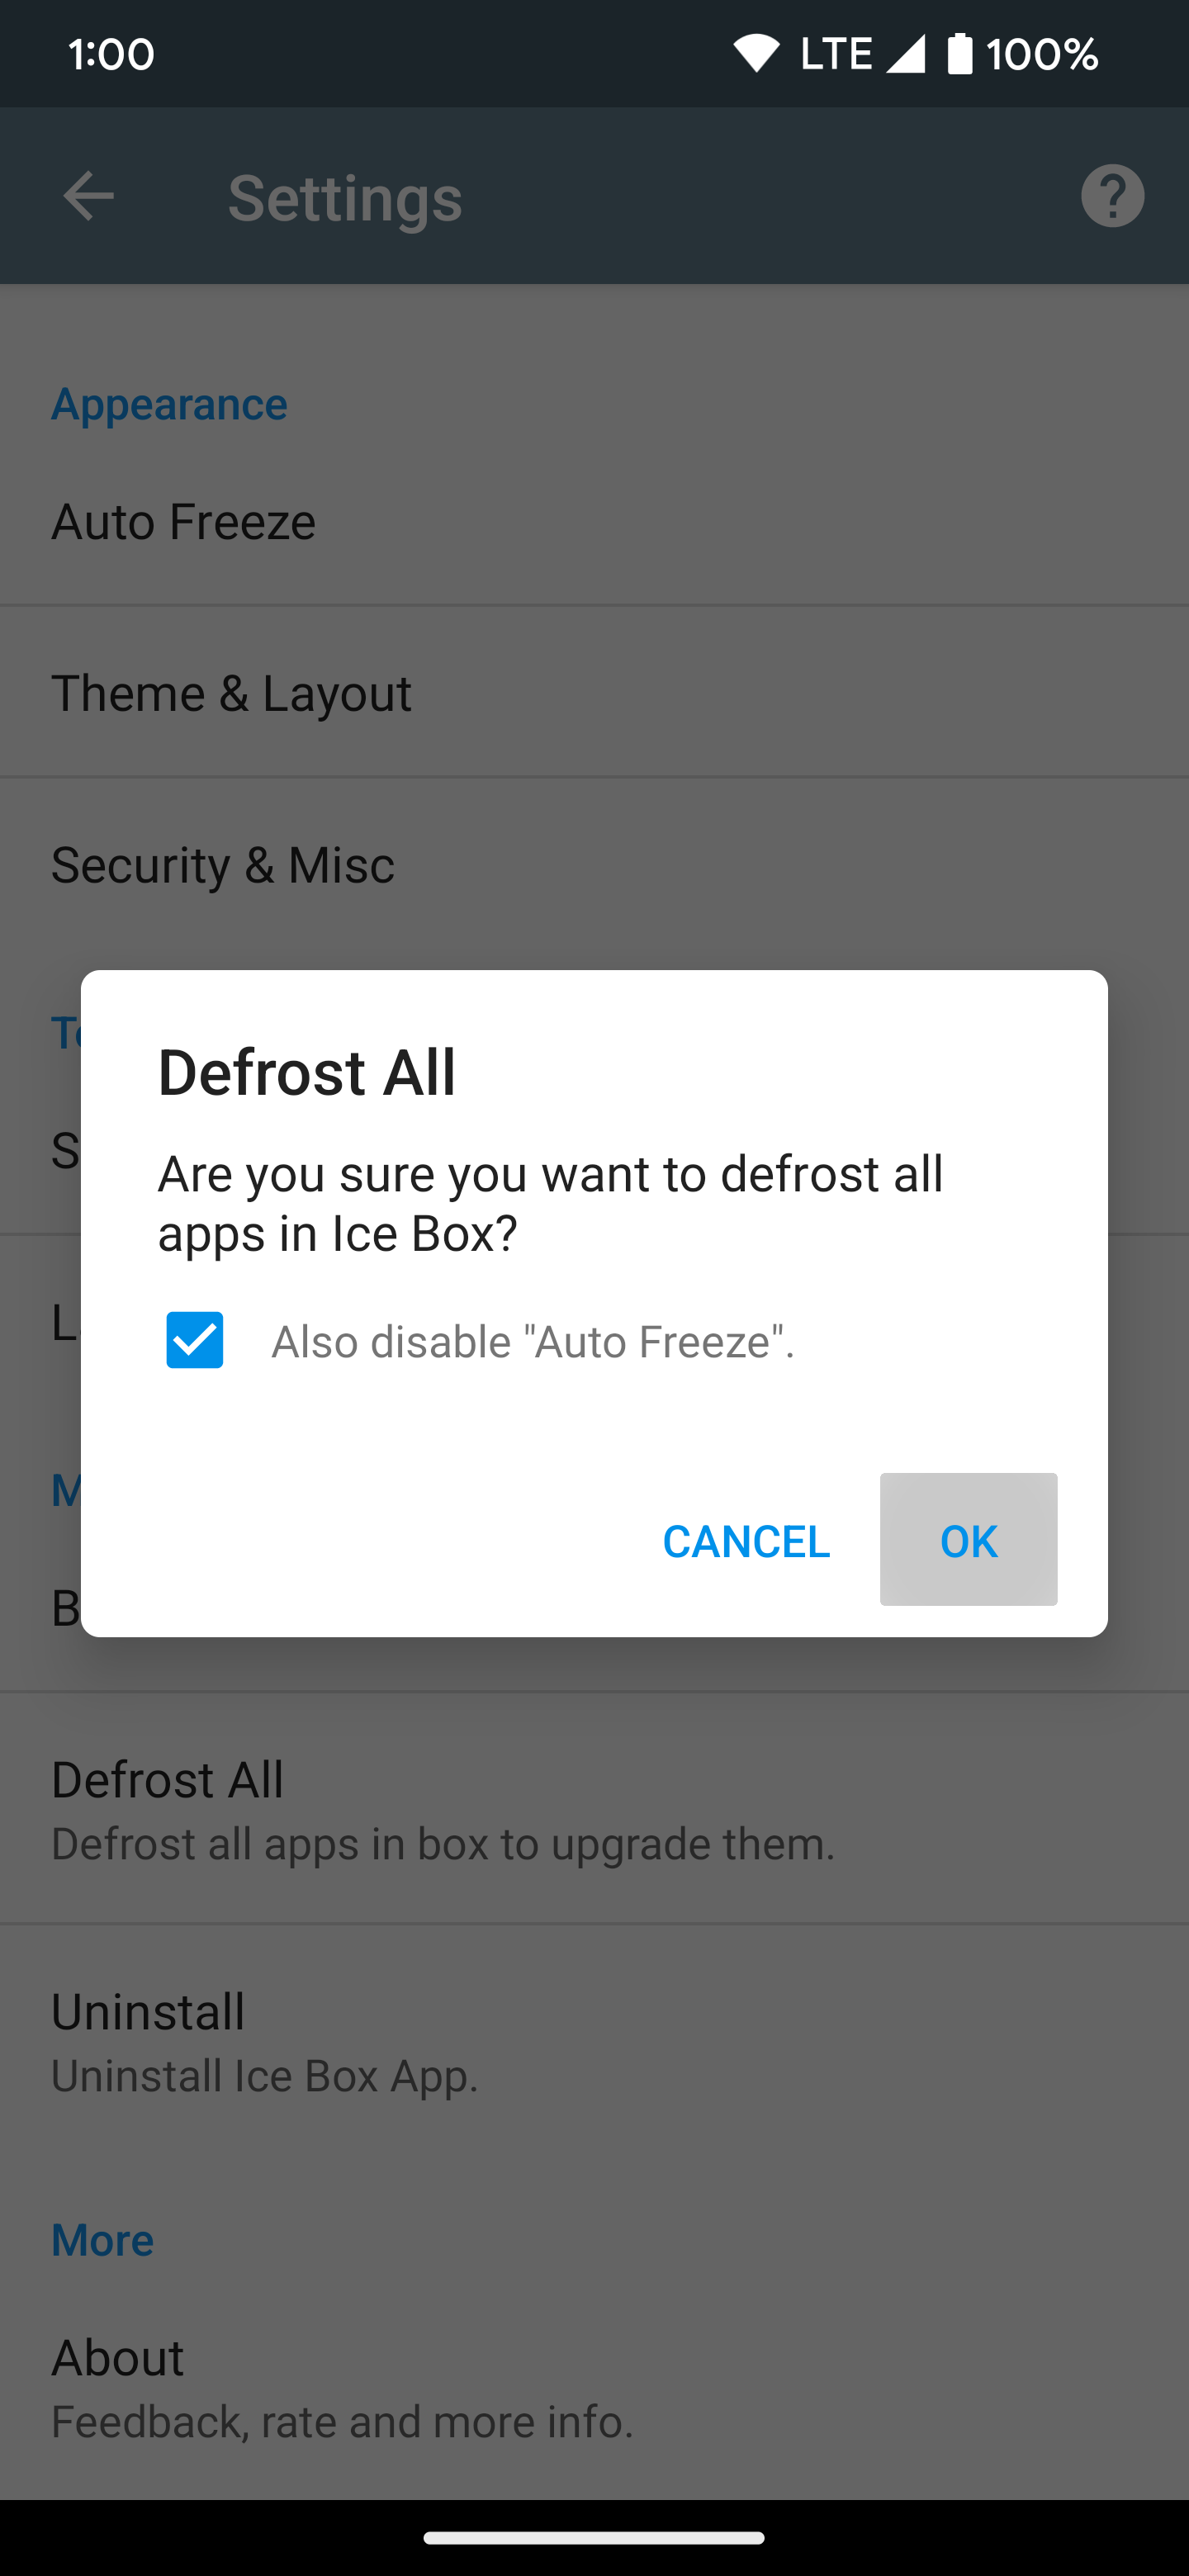 Confirming the Defrost All option in the Ice Box app and pressing OK